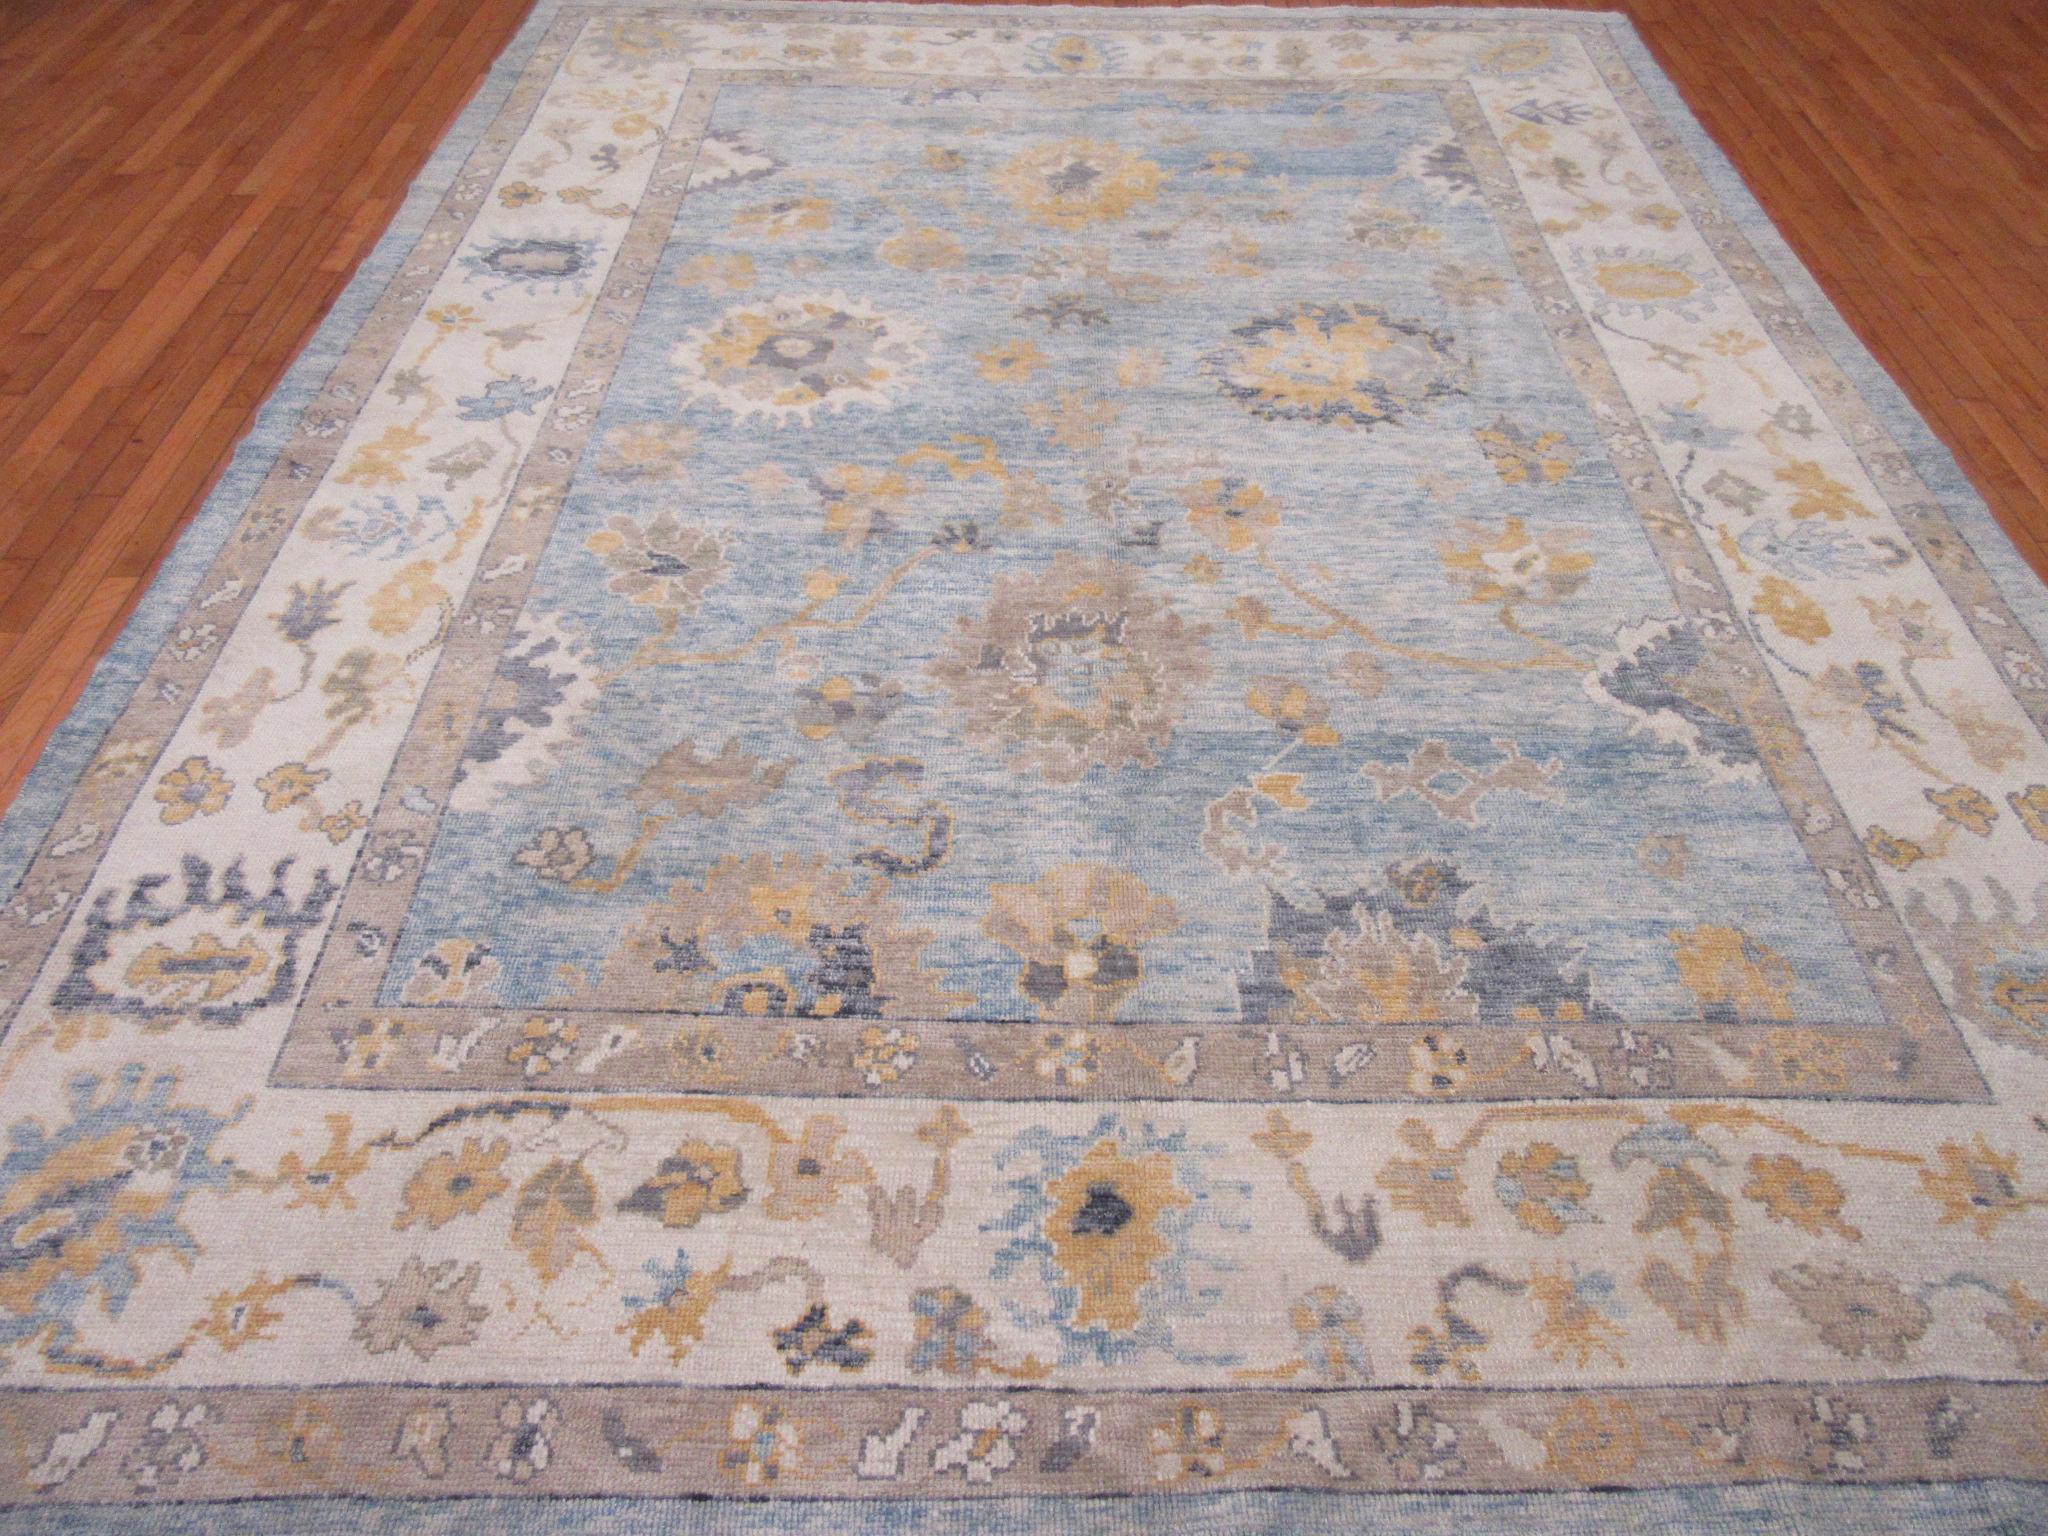 This is a new room size hand knotted Turkish Oushak rug. It is made with all good quality Turkish wool in the spirit of the antique Oushak rugs. It measures 9' 5'' x 12' 6'' a great addition to any room.